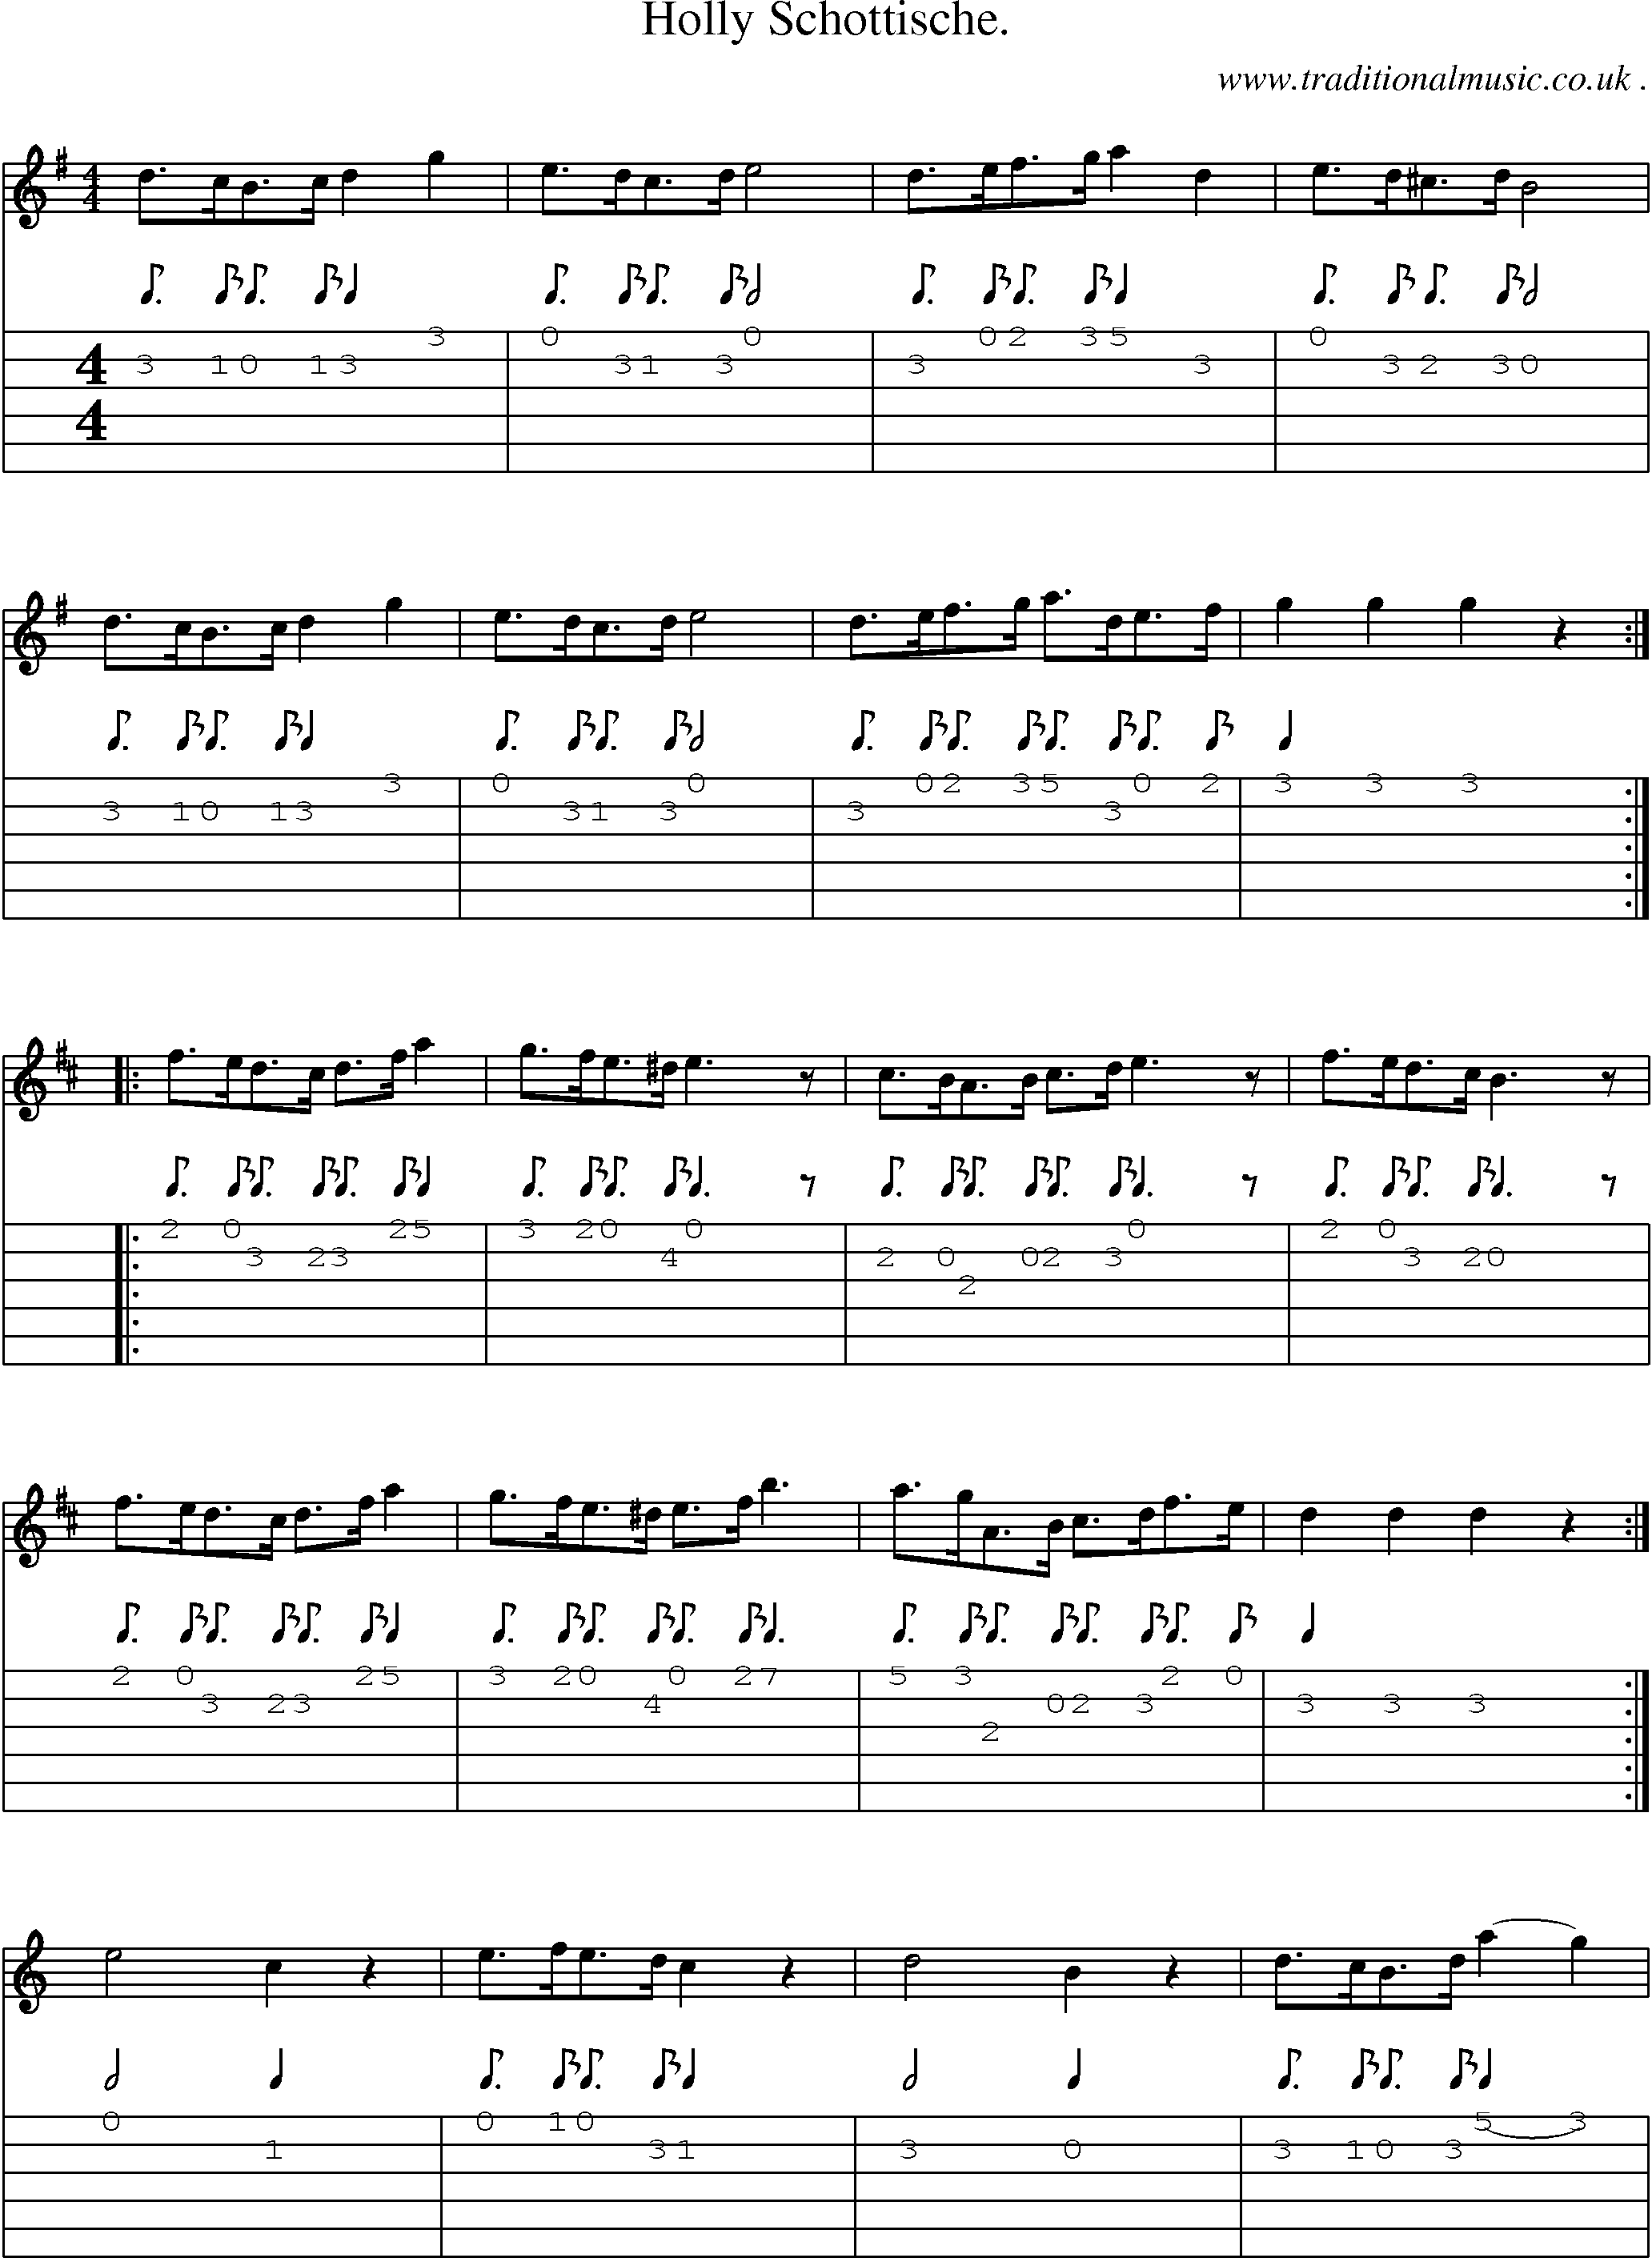 Sheet-Music and Guitar Tabs for Holly Schottische